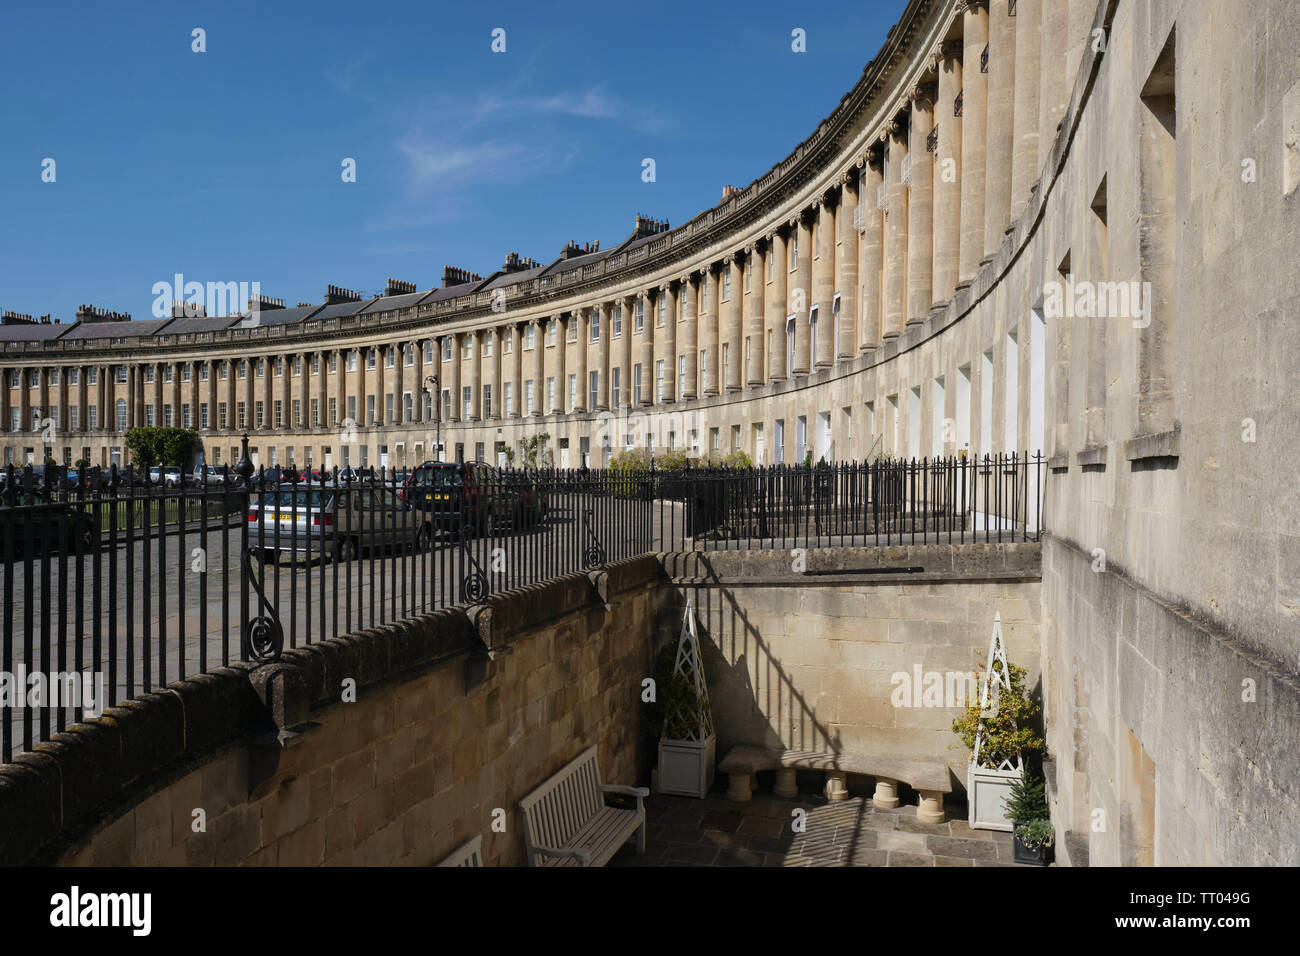 Royal Crescent, Bath, England, UK. Designed by architect John Wood the Younger in the Palladian style. Stock Photo